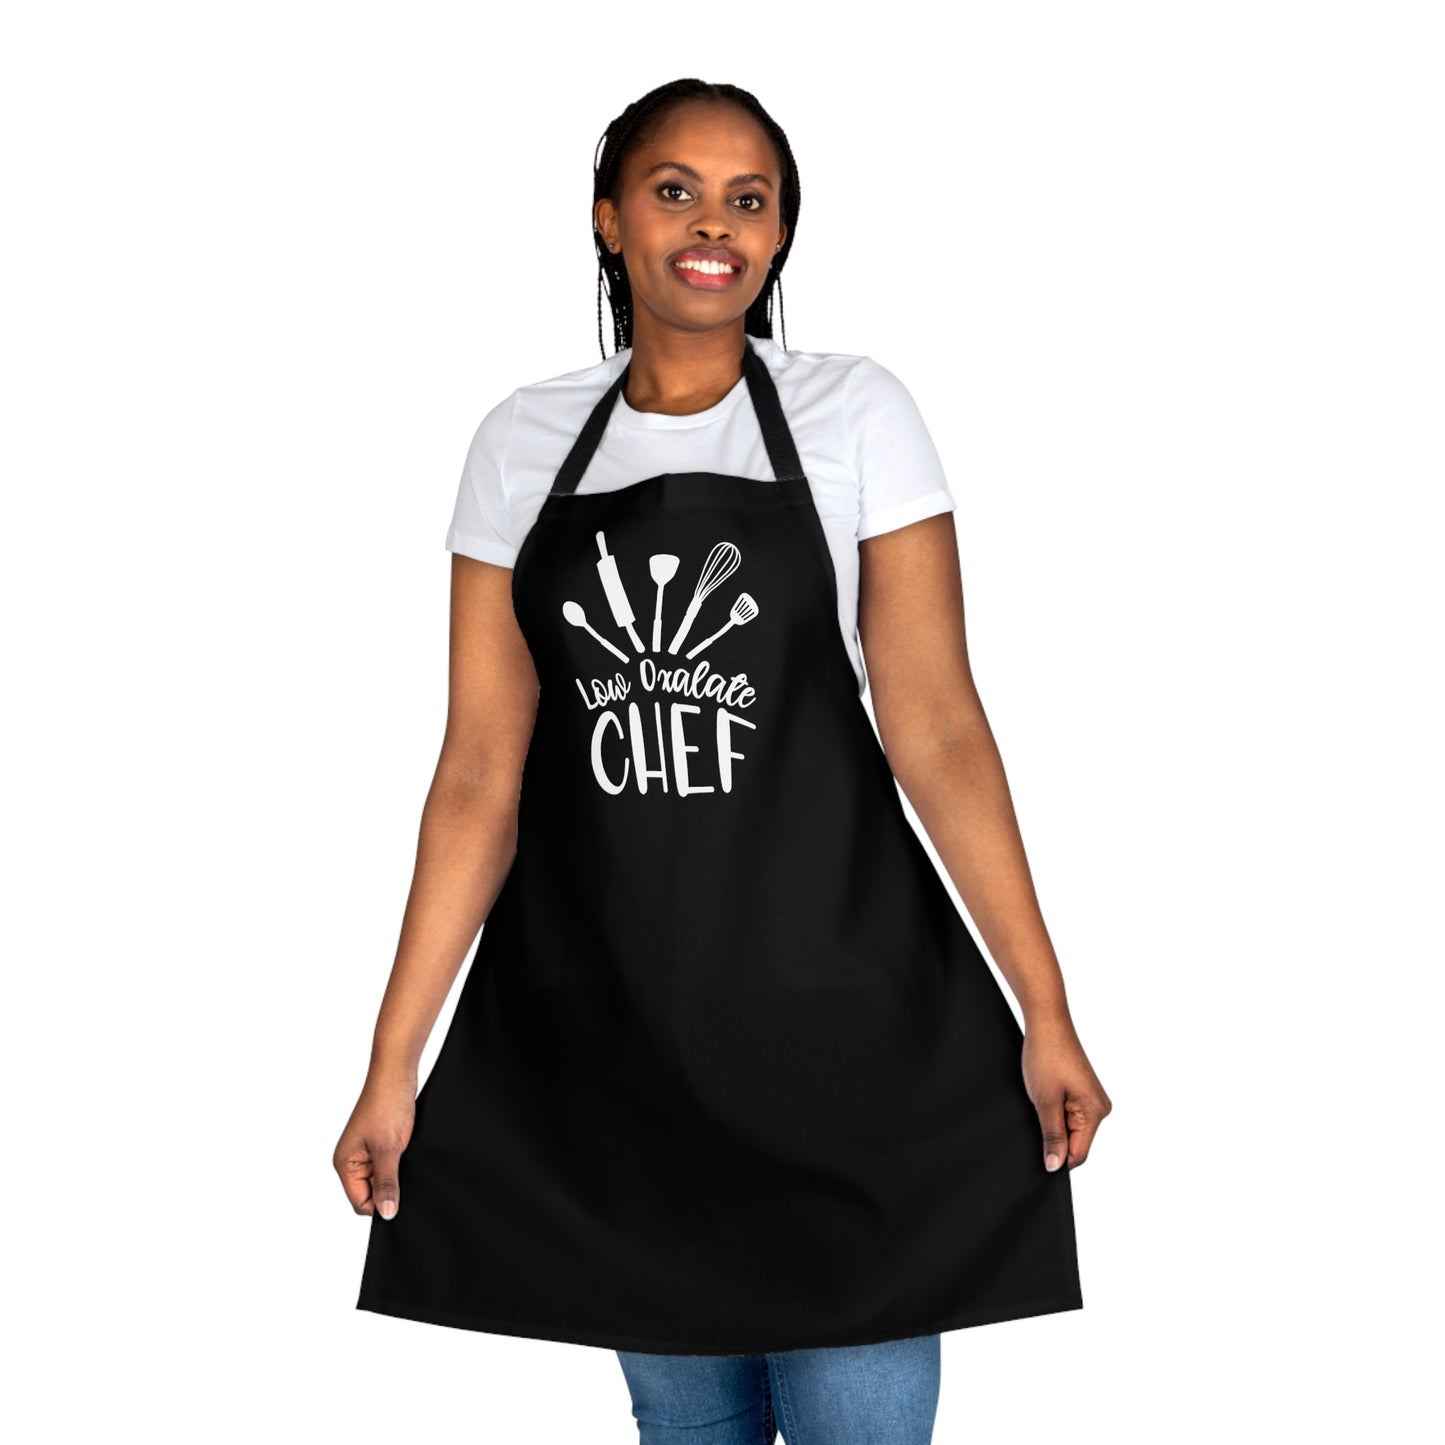 Low Oxalate Chef Cooking Apron 